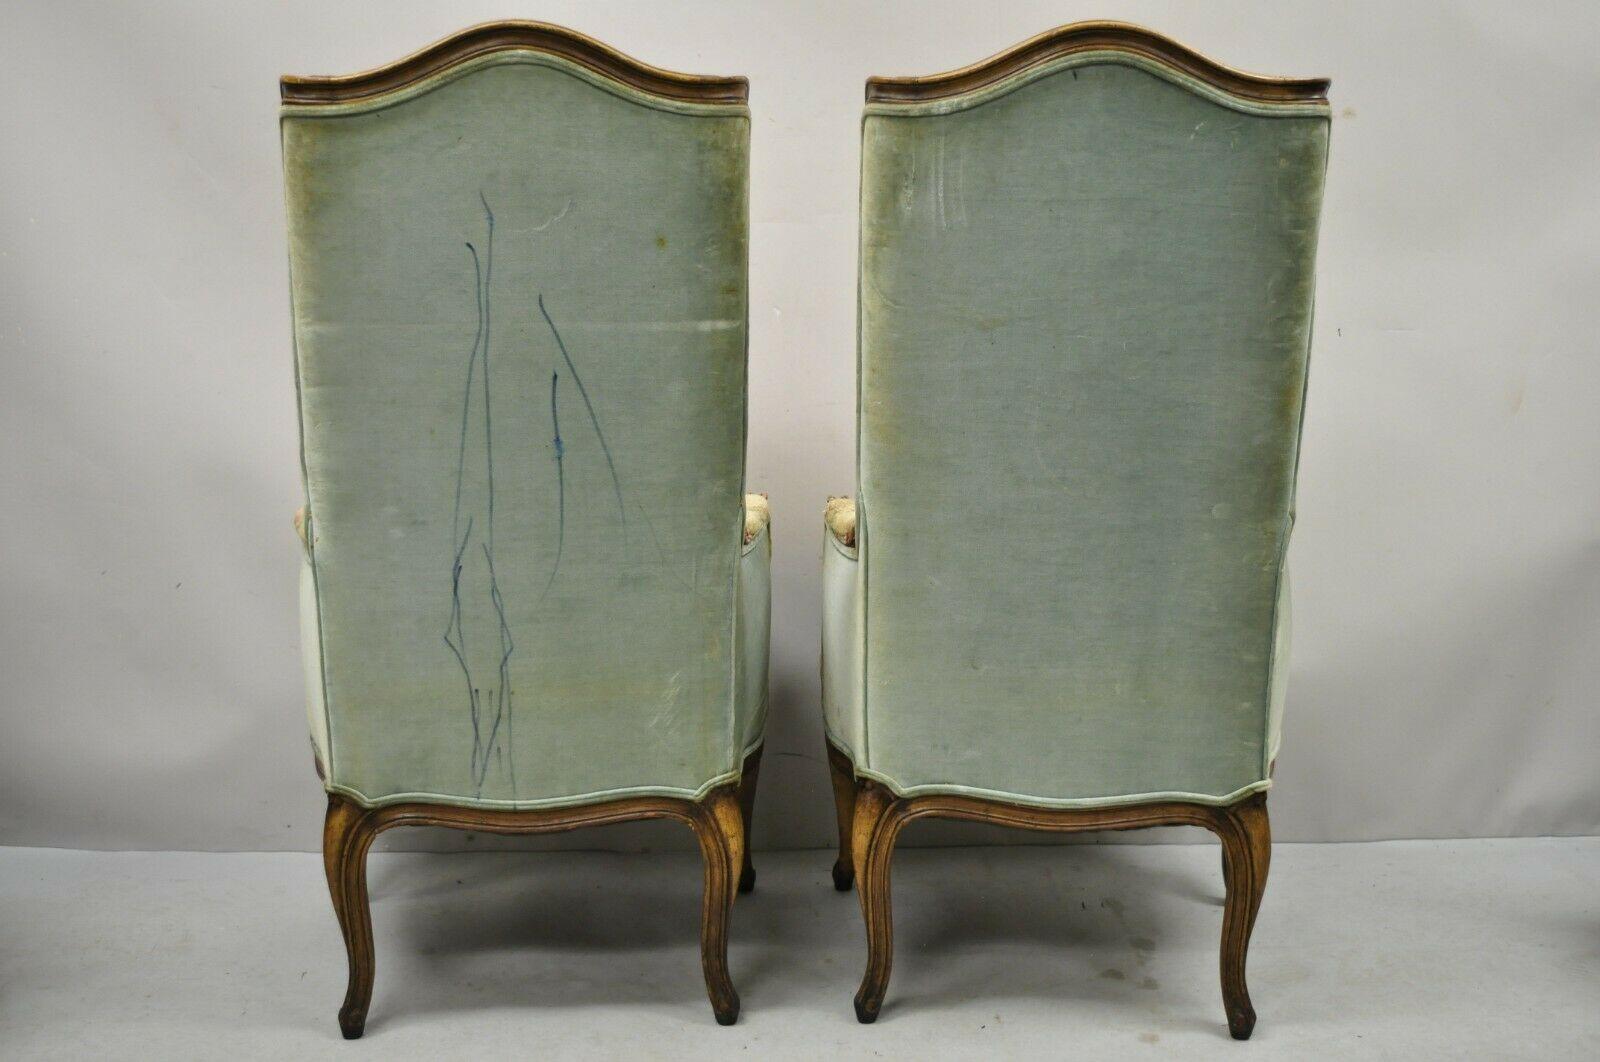 Vintage French Provincial Louis XV Country Narrow Tall Back Chairs 'B' - a Pair For Sale 5